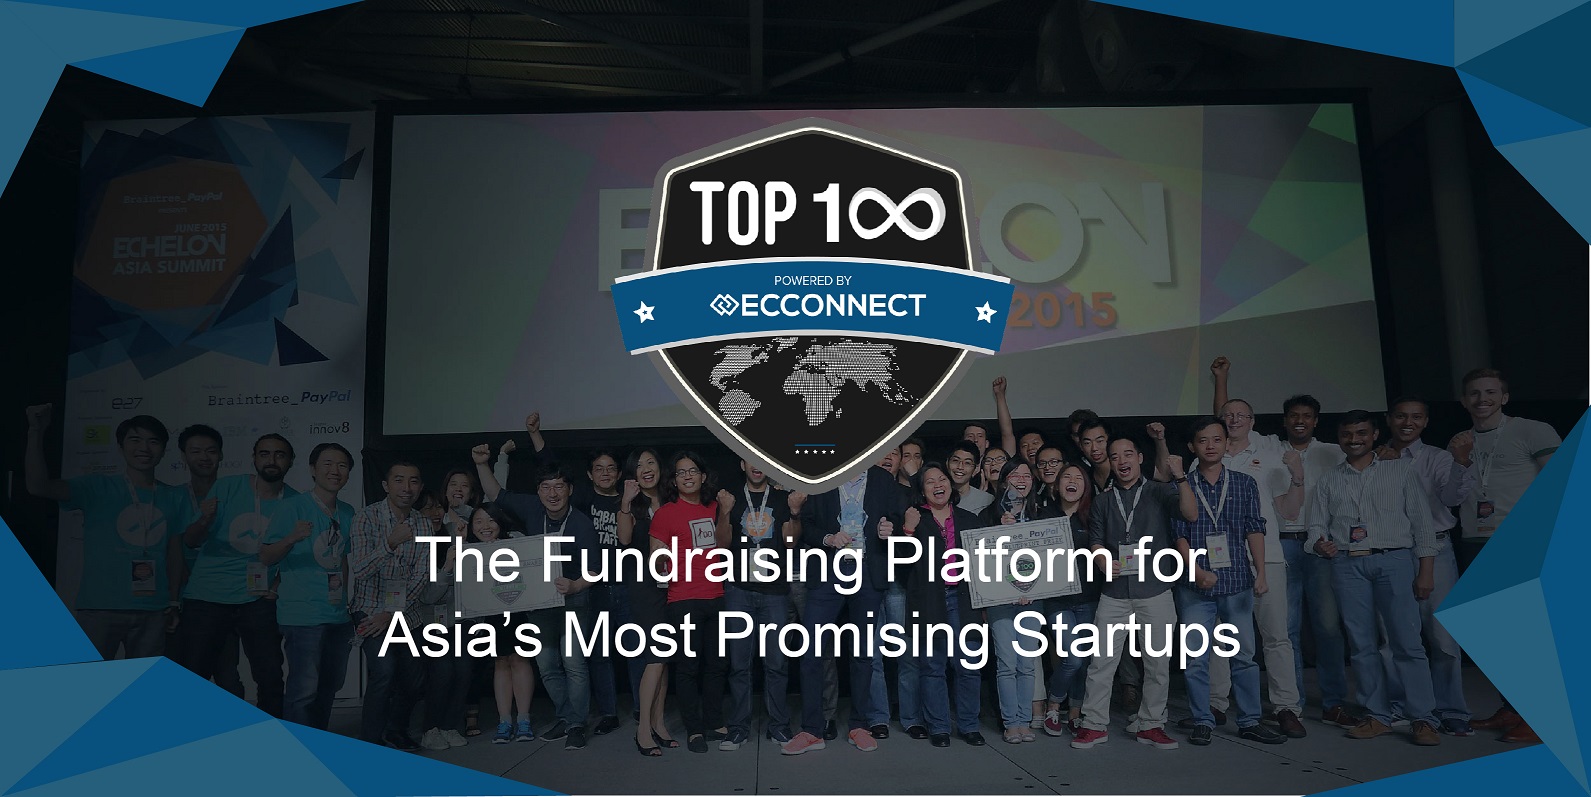 TOP100 relaunches with new features to bridge gaps between startups, investors